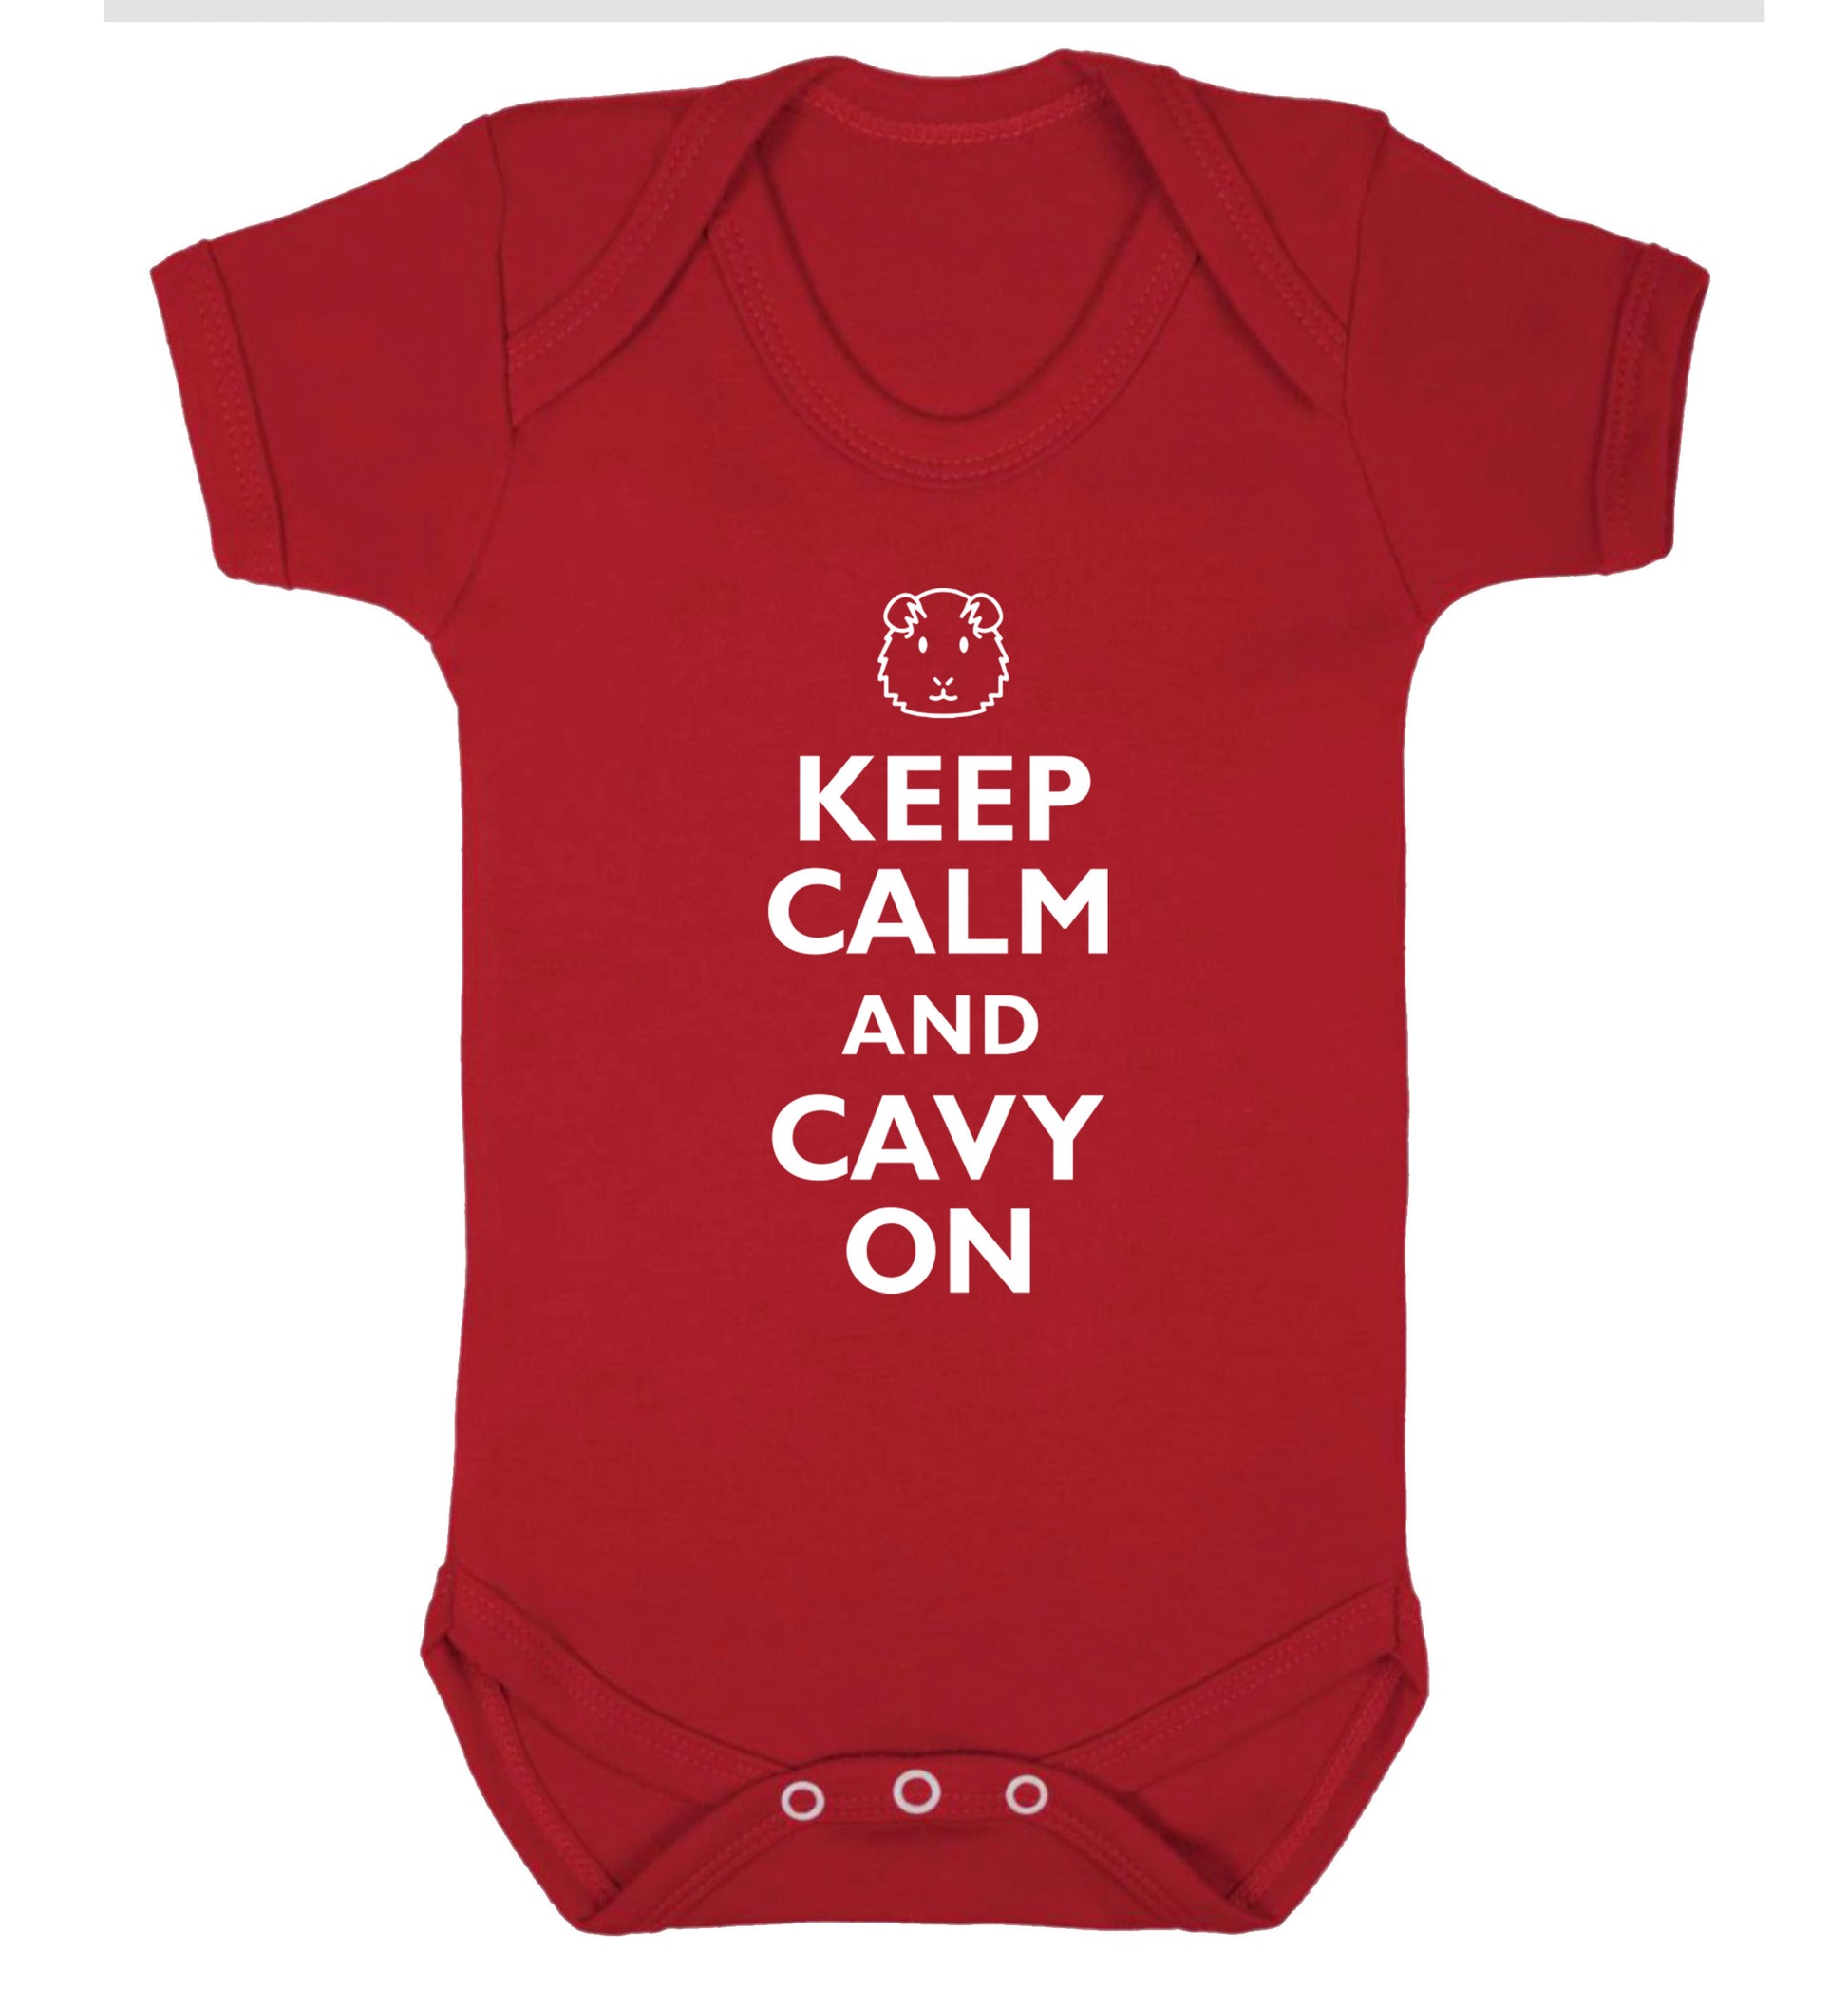 Keep calm and cavvy on Baby Vest red 18-24 months